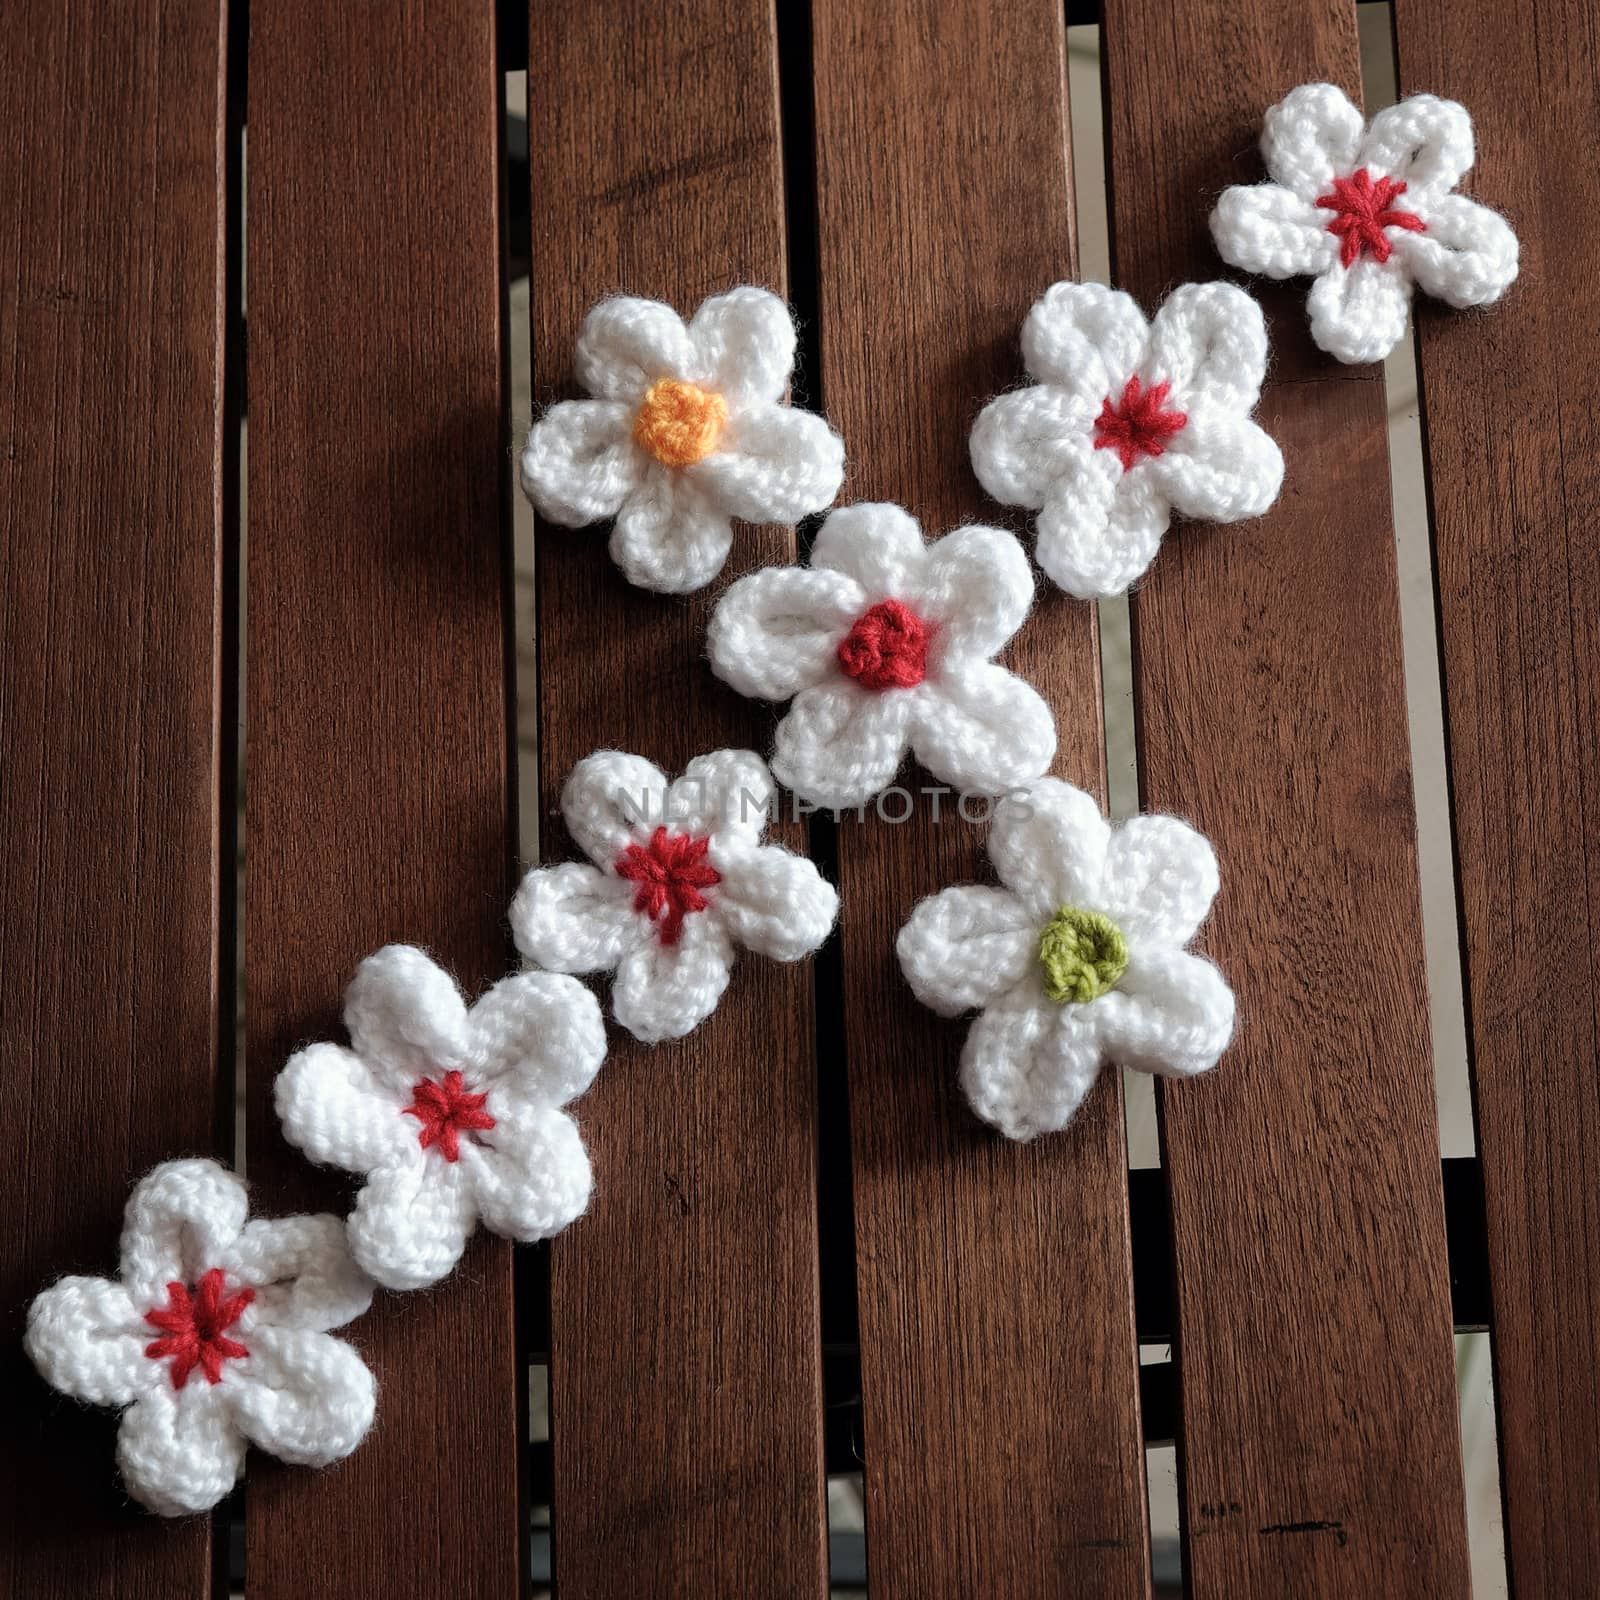 Group of handmade product for mother day, white daisy flower on wood background, make by knit from yarn